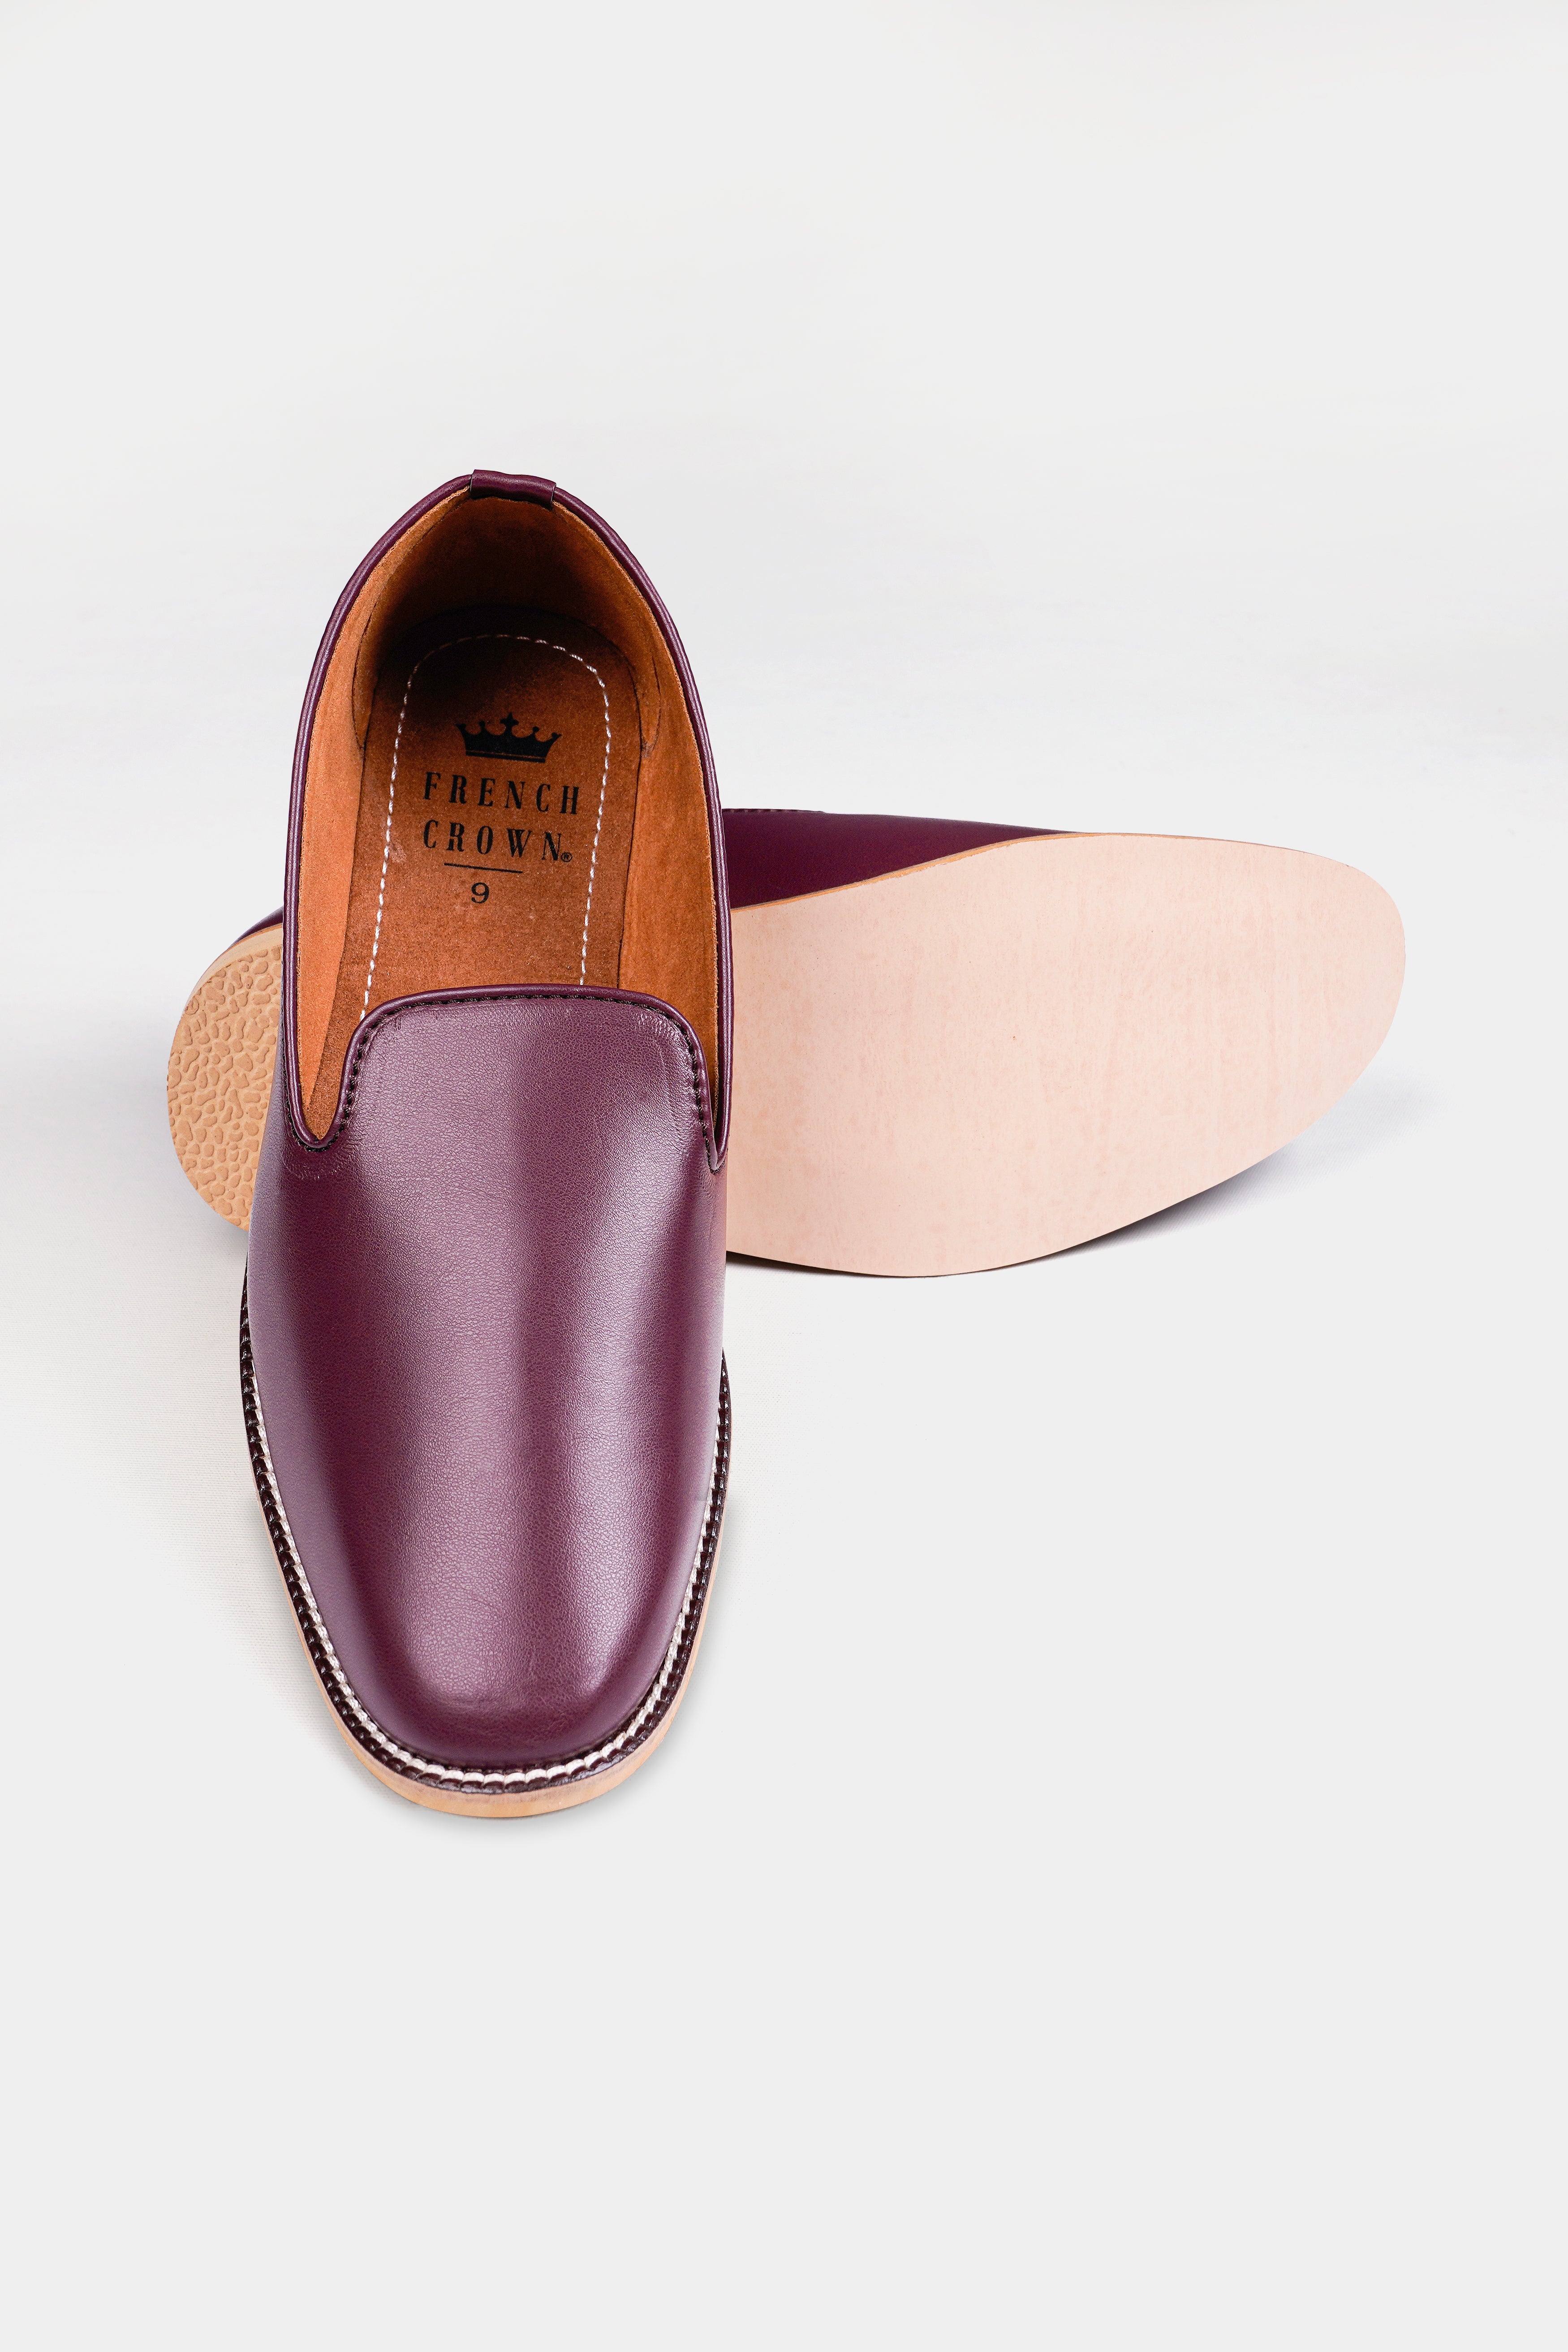 Wine Vegan Leather Hand Stitched Mojri Slip-On Shoes FT141-6, FT141-7, FT141-8, FT141-9, FT141-10, FT141-11